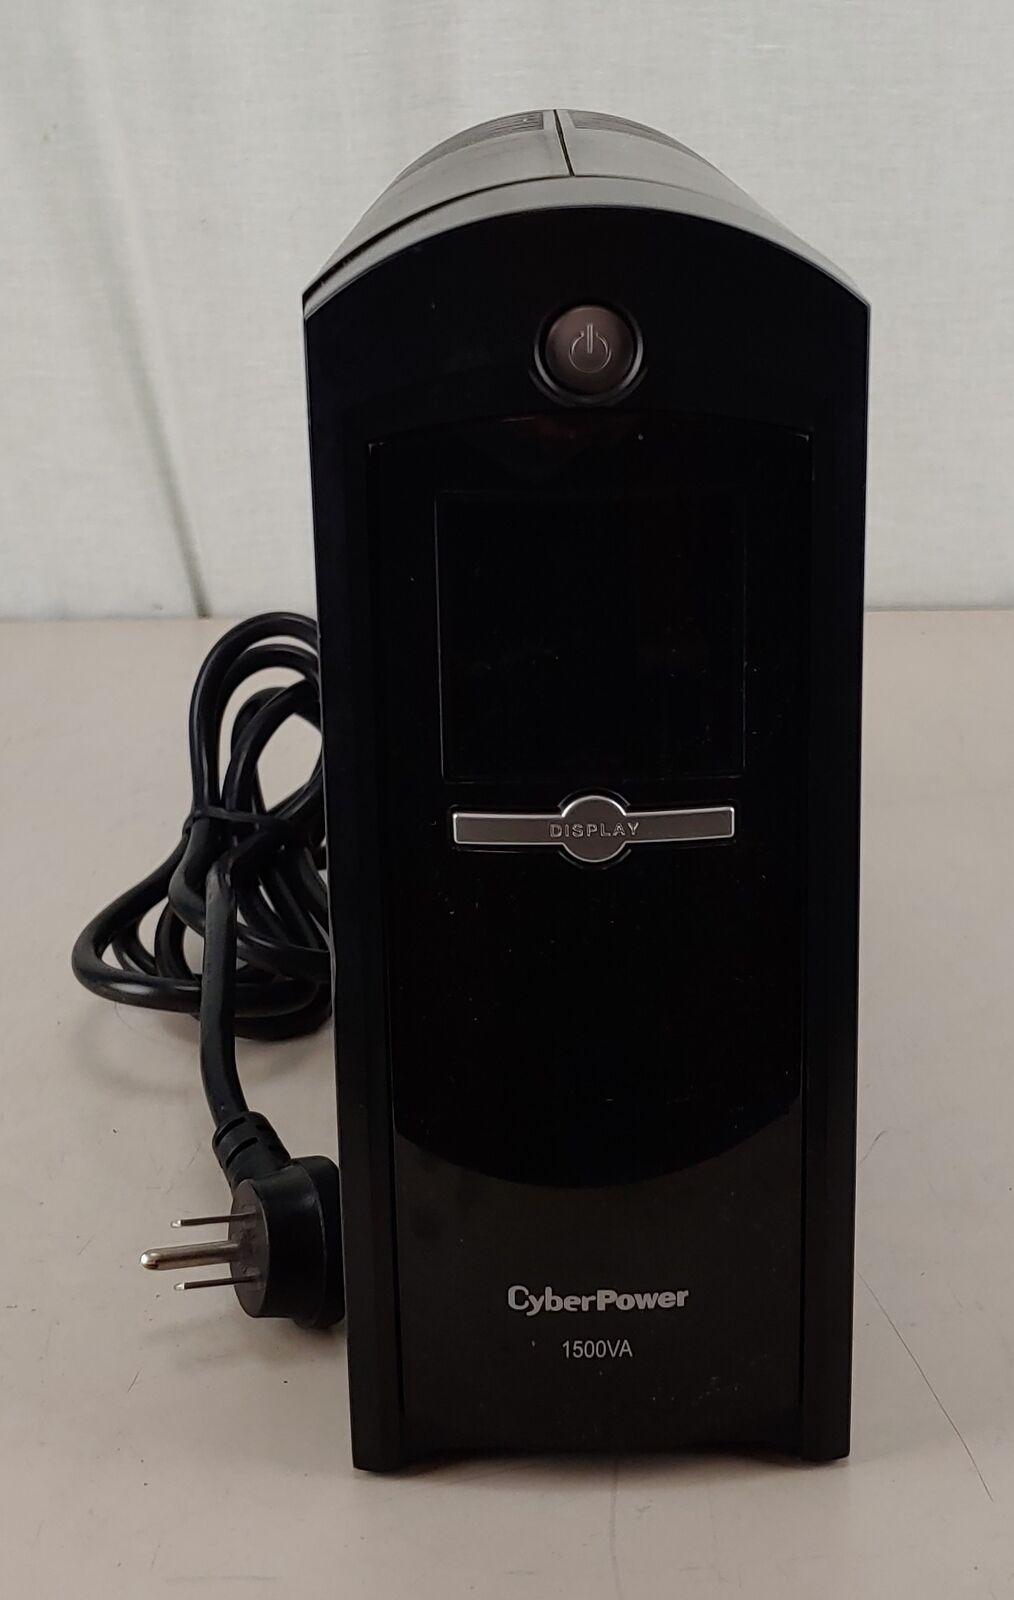 Cyber Power 1500VA Power Supply 8 Power Outlets NO BATTERIES